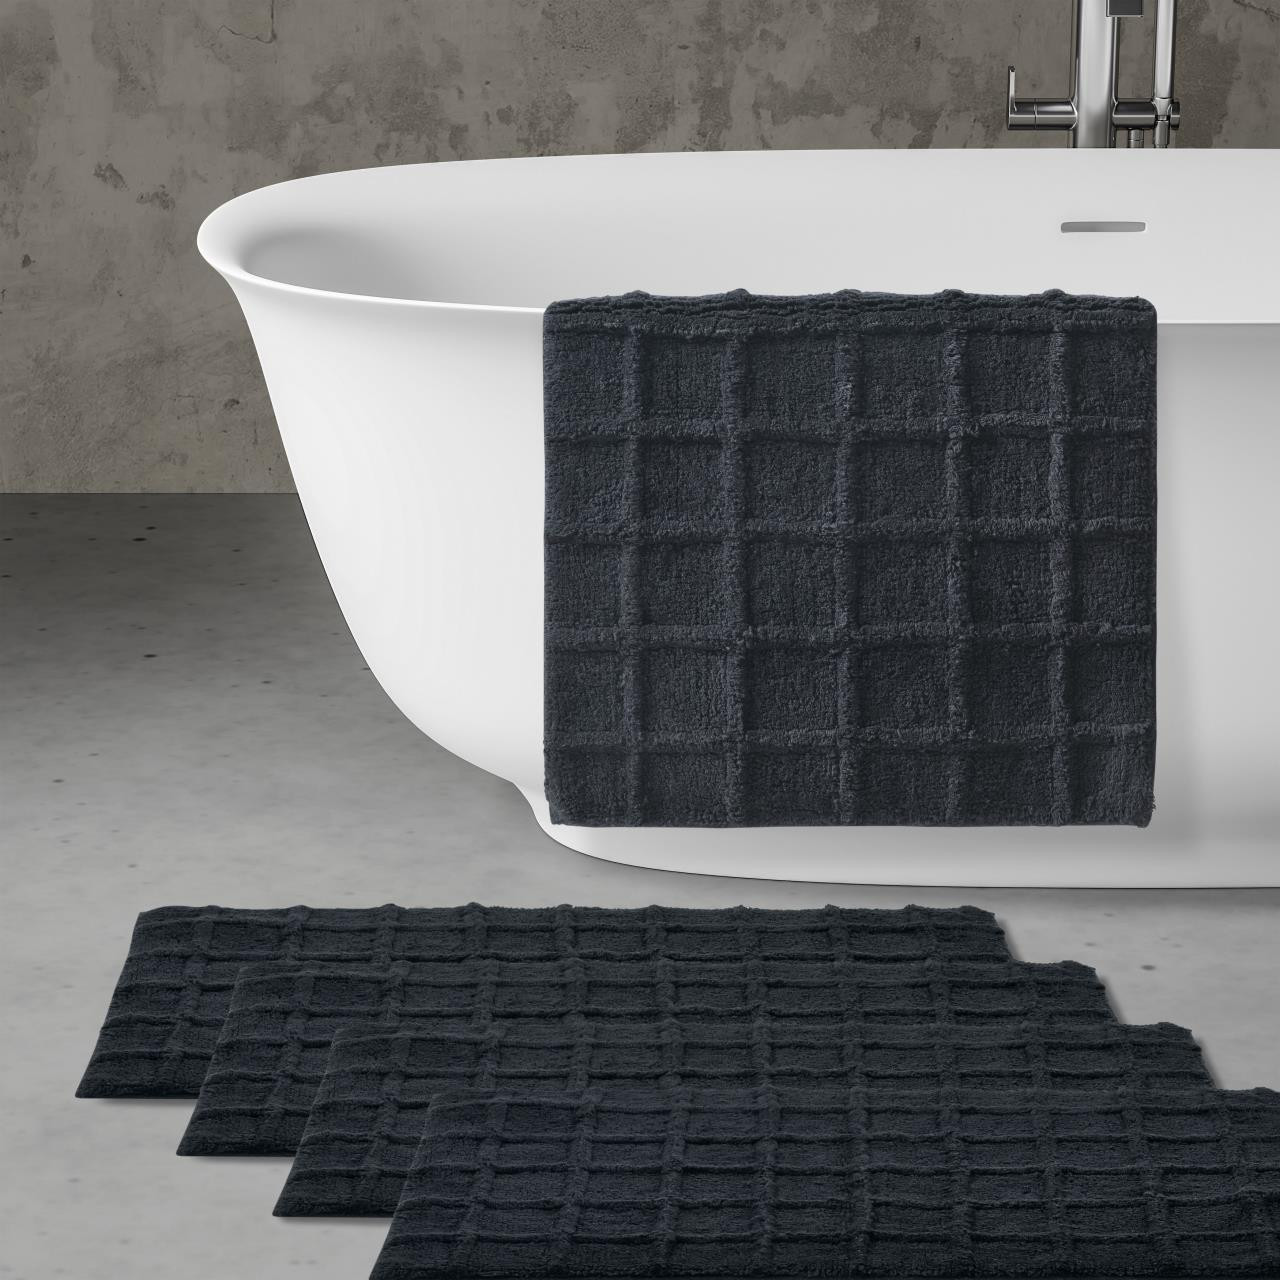 https://cdn10.bigcommerce.com/s-9ese1/products/23452/images/138991/Cameron-Navy-Bath-Rug-193842129807_image3__82692.1658291652.1280.1280.jpg?c=2